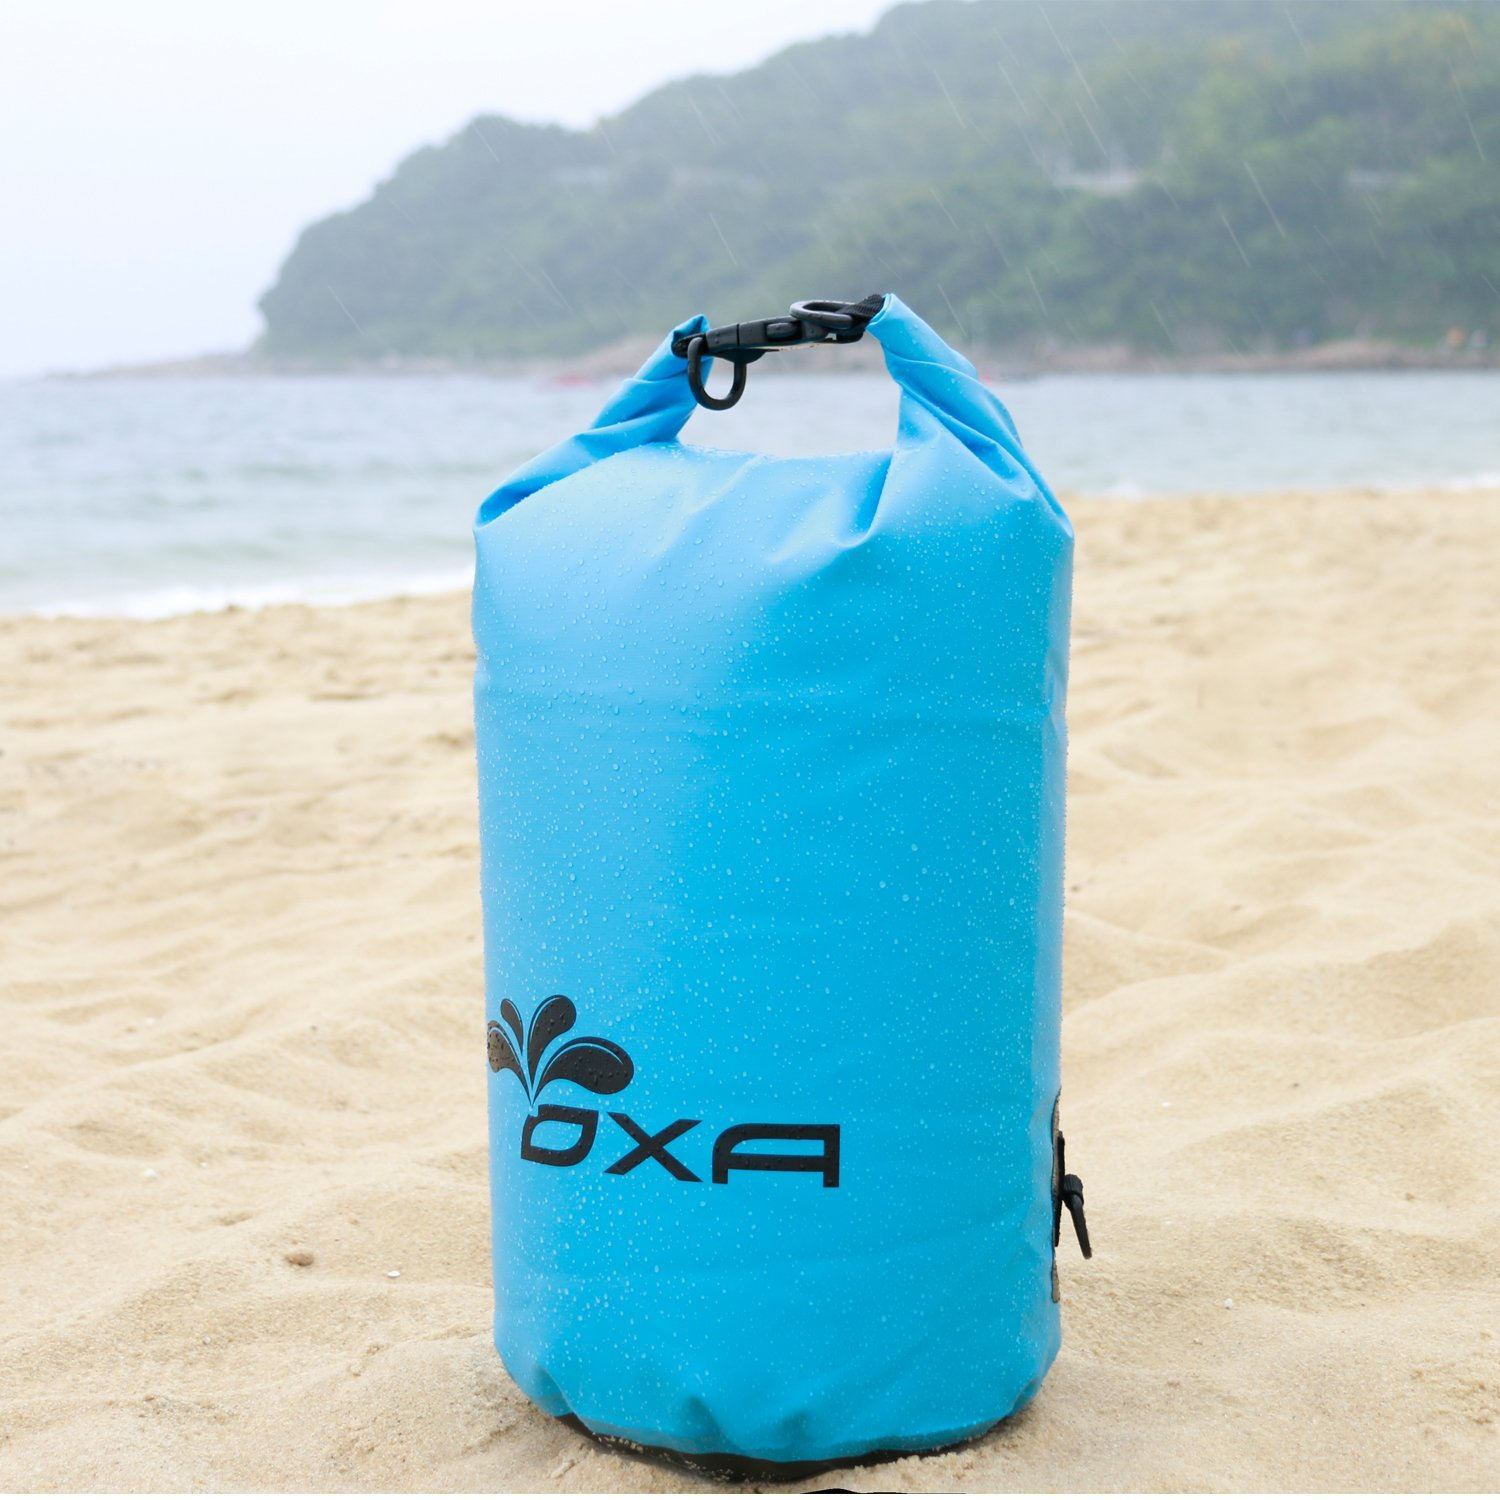 Amazon: Waterproof Dry Bag Only $11.65! (Great For The Beach or Pool)